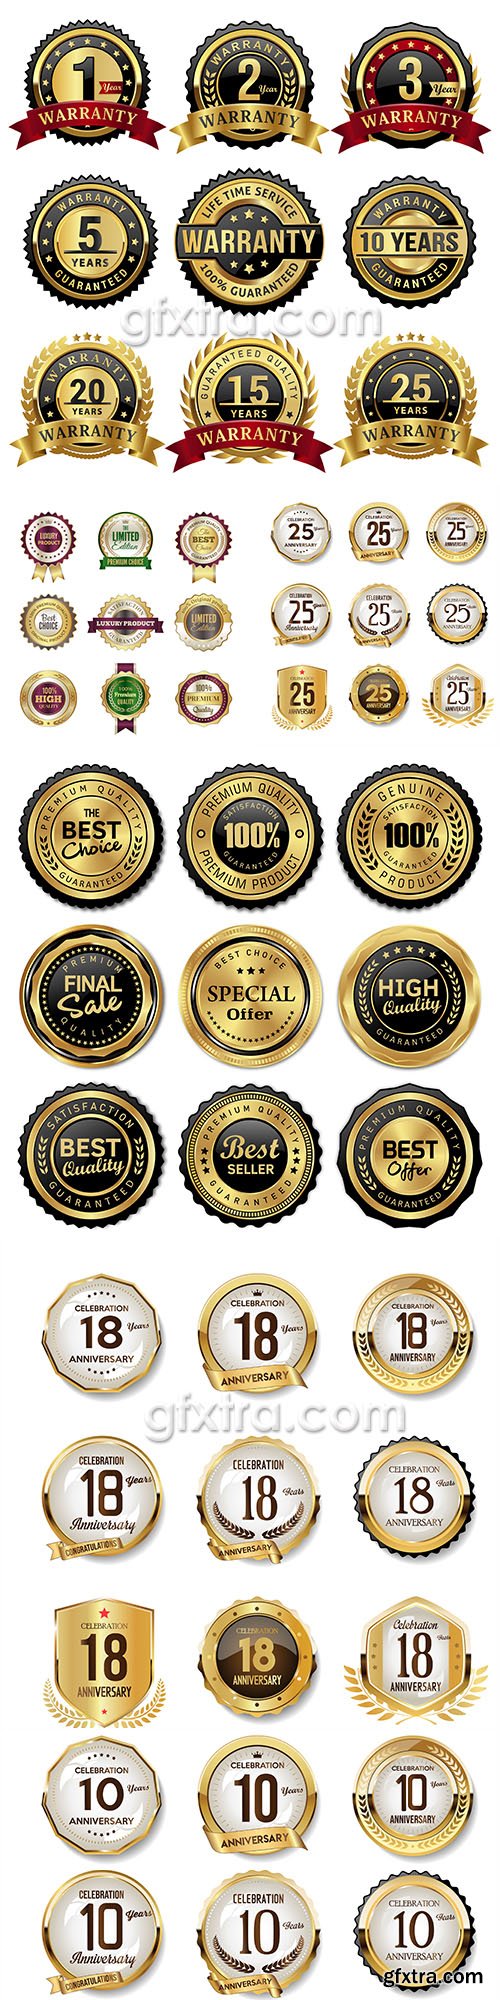 Premium quality gold badges and labels collection 31